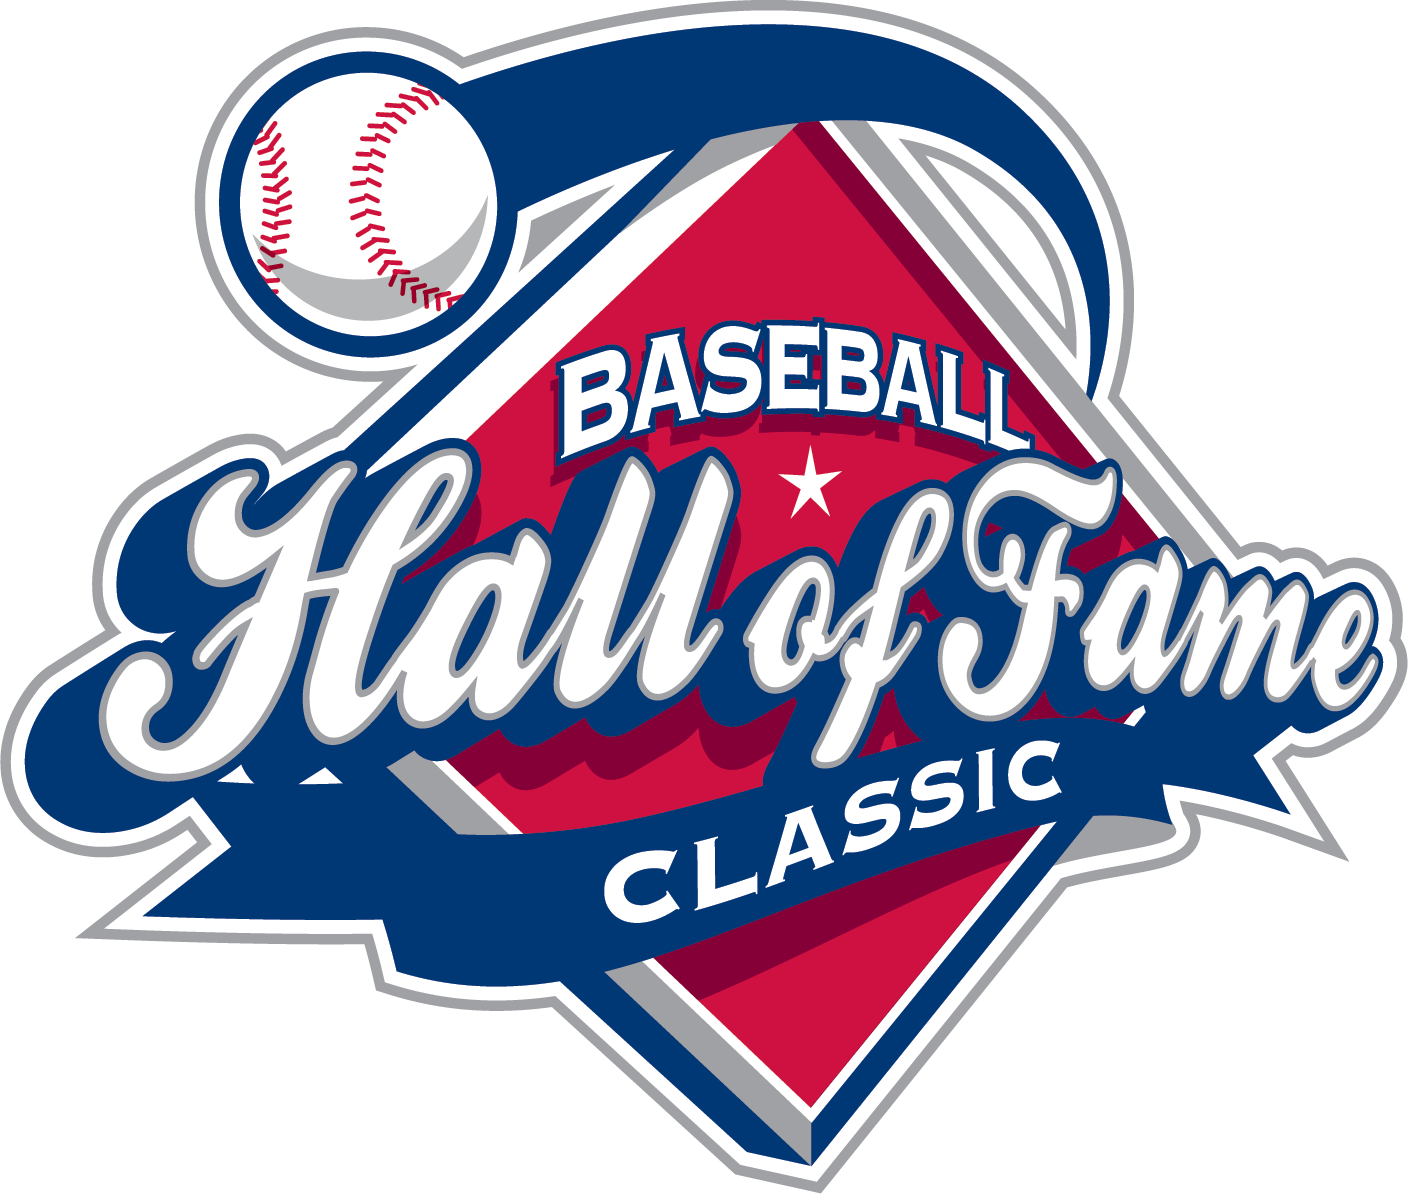 HSPN SPORTS™ Agrees To Cover Hall of Fame Baseball Championship